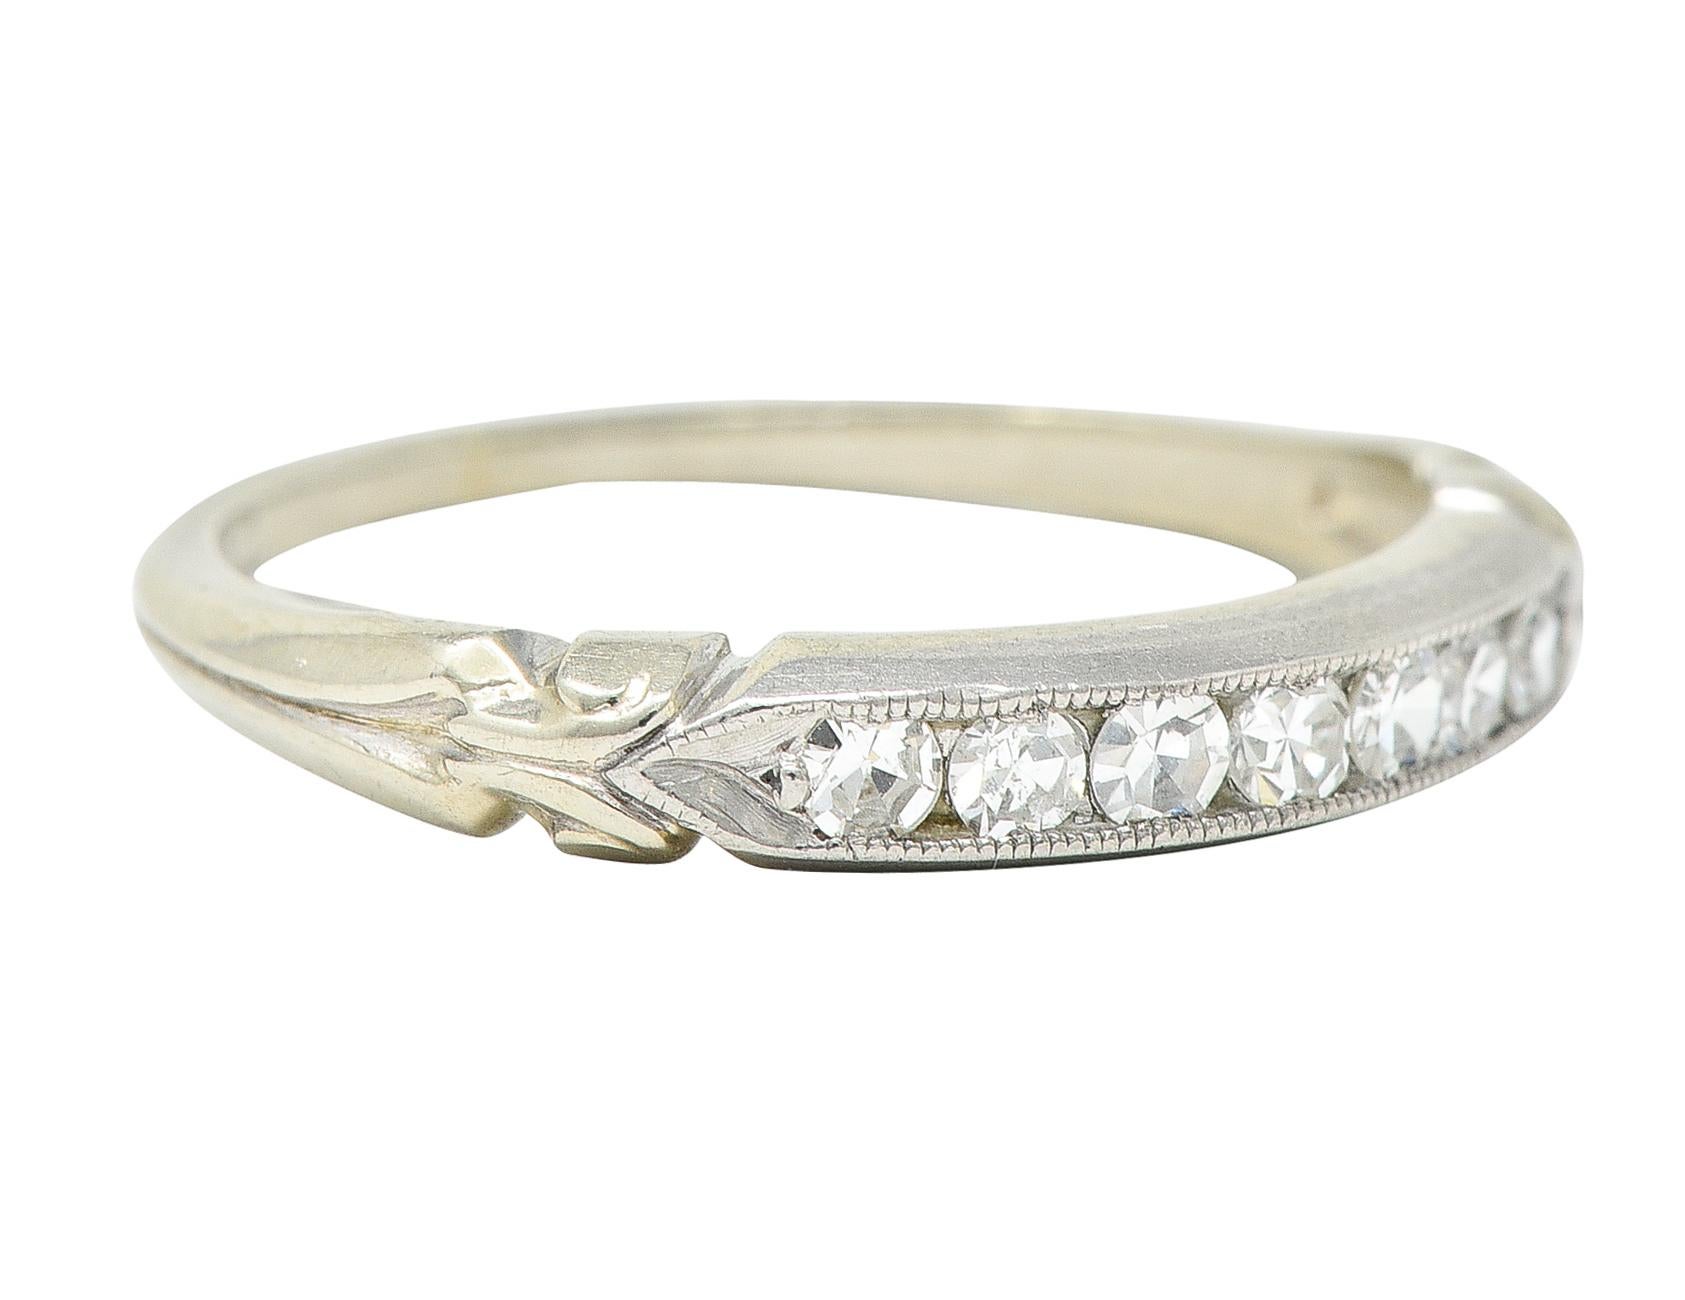 Band ring features single cut diamonds weighing collectively approximately 0.25 carat - G/H color with SI clarity. Channel set to front in a platinum recess with a milgrain surround. With pointed shoulders accented by a scrolled volute motif. Subtly